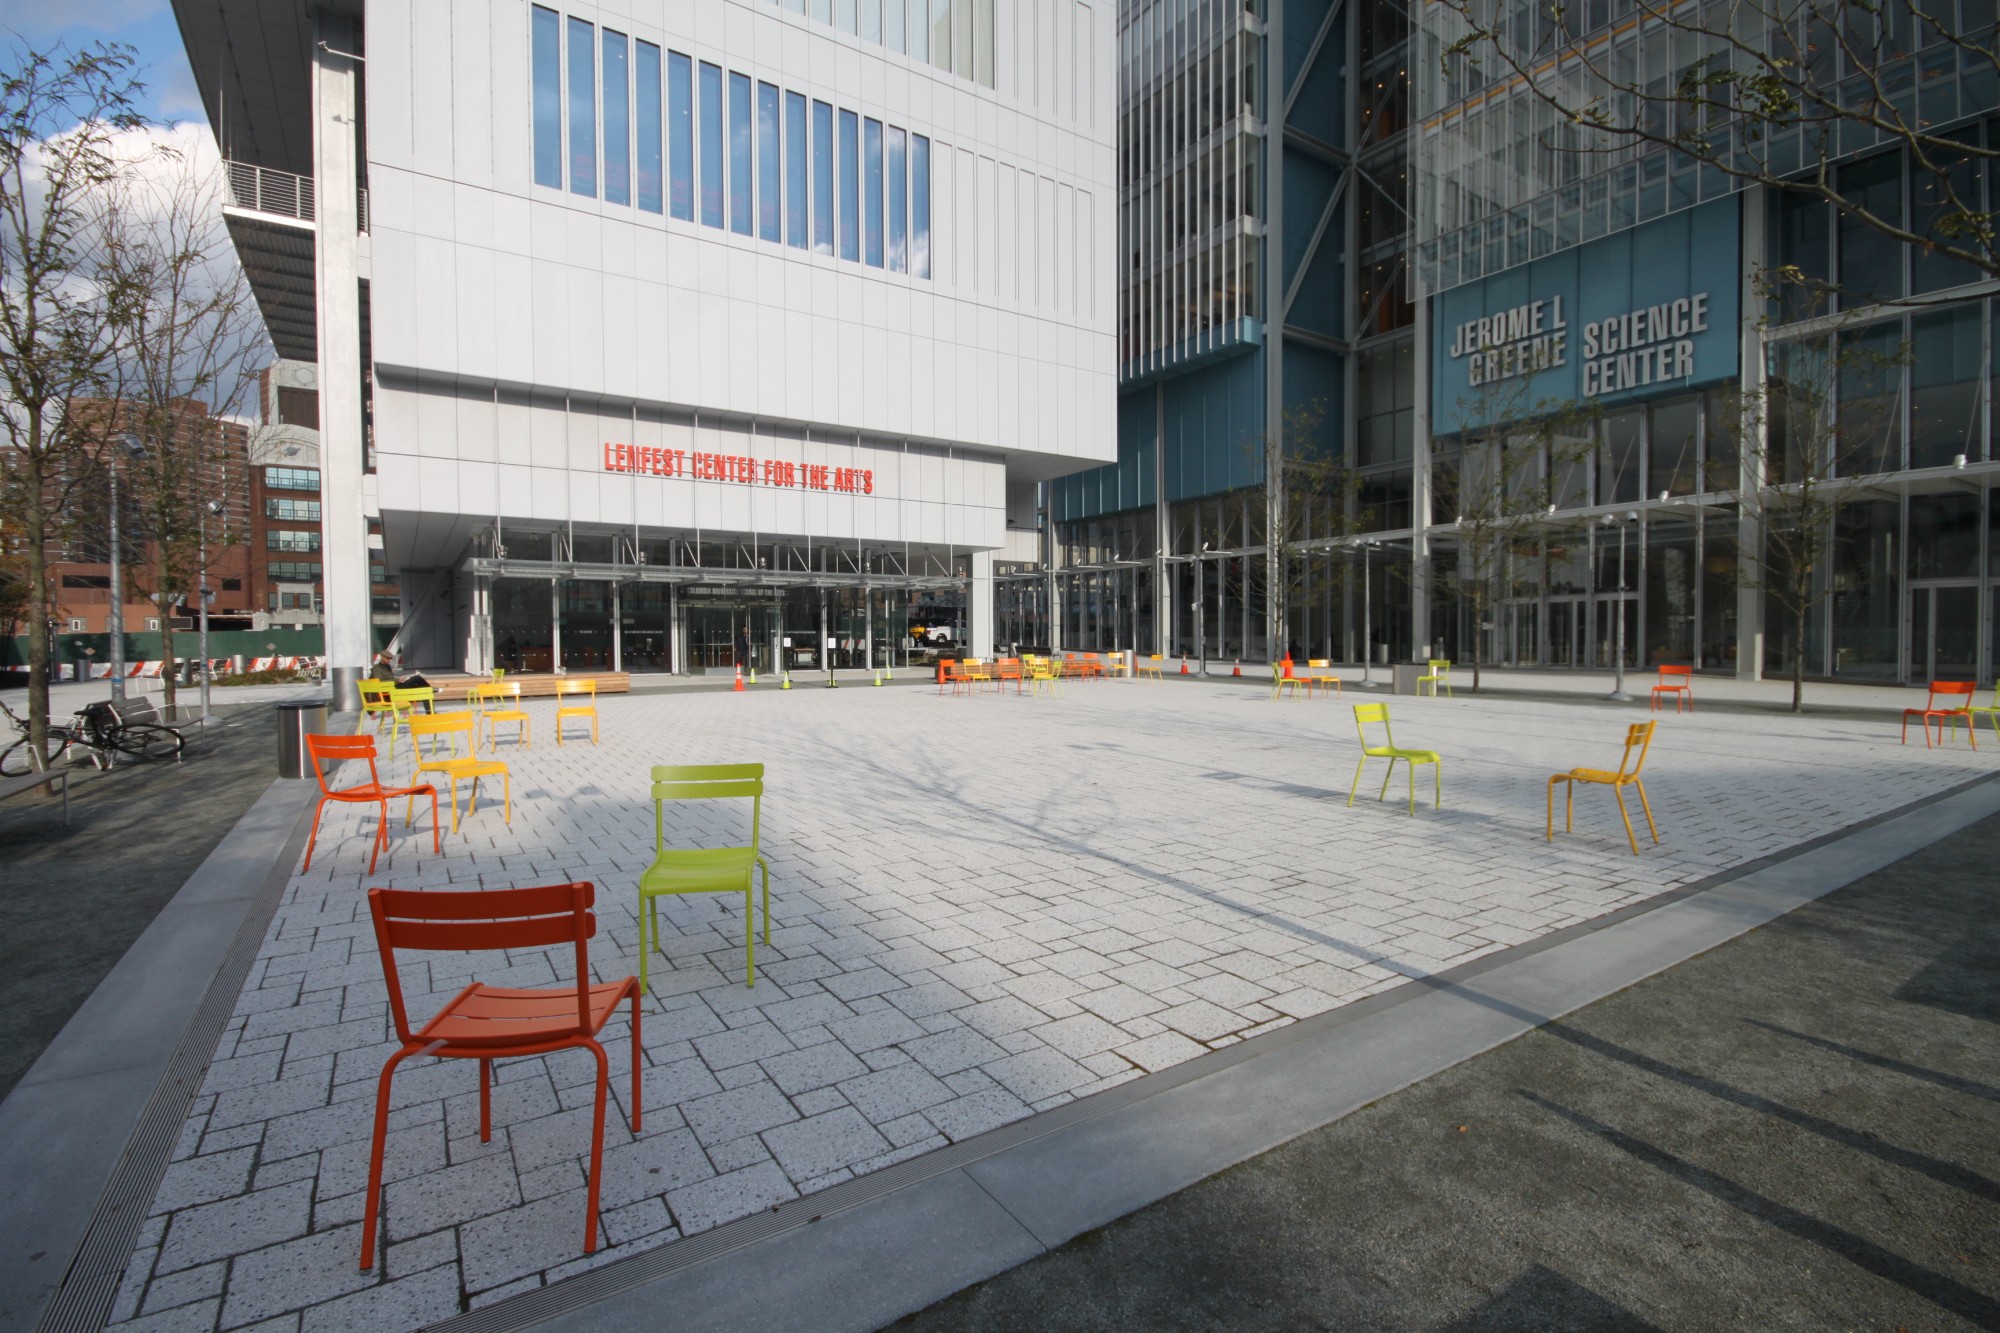 A grey stone plaza outside Lenfest Center for the Arts, a concrete structure, and Jerome L. Greene Science Center, a glass and steel structure. Multi-color metal chairs dot the plaza.